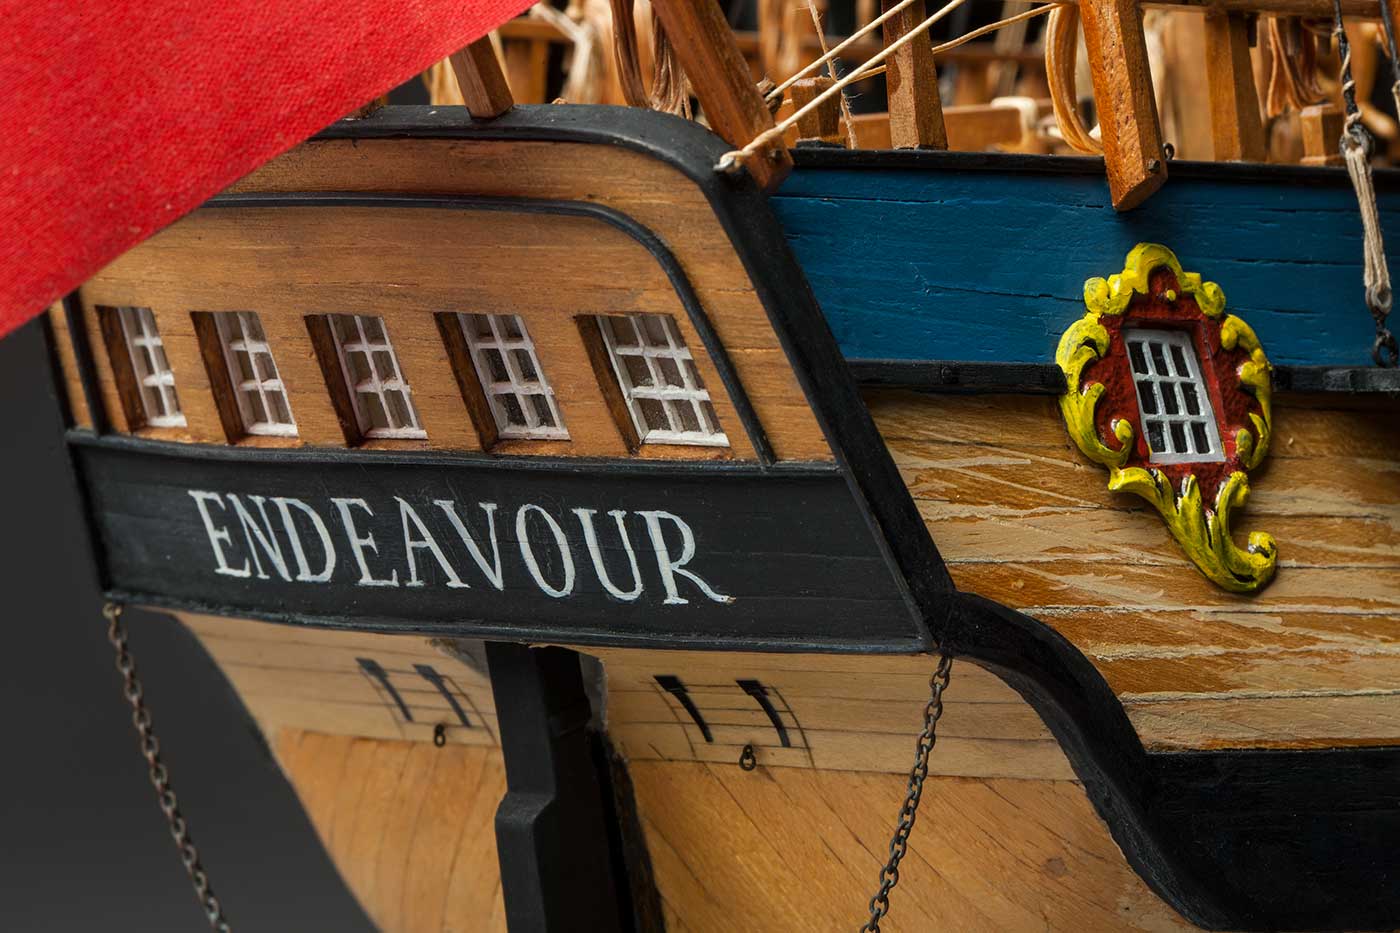 Detail image showing the stern of the <em>Endeavour</em> sailing ship. - click to view larger image